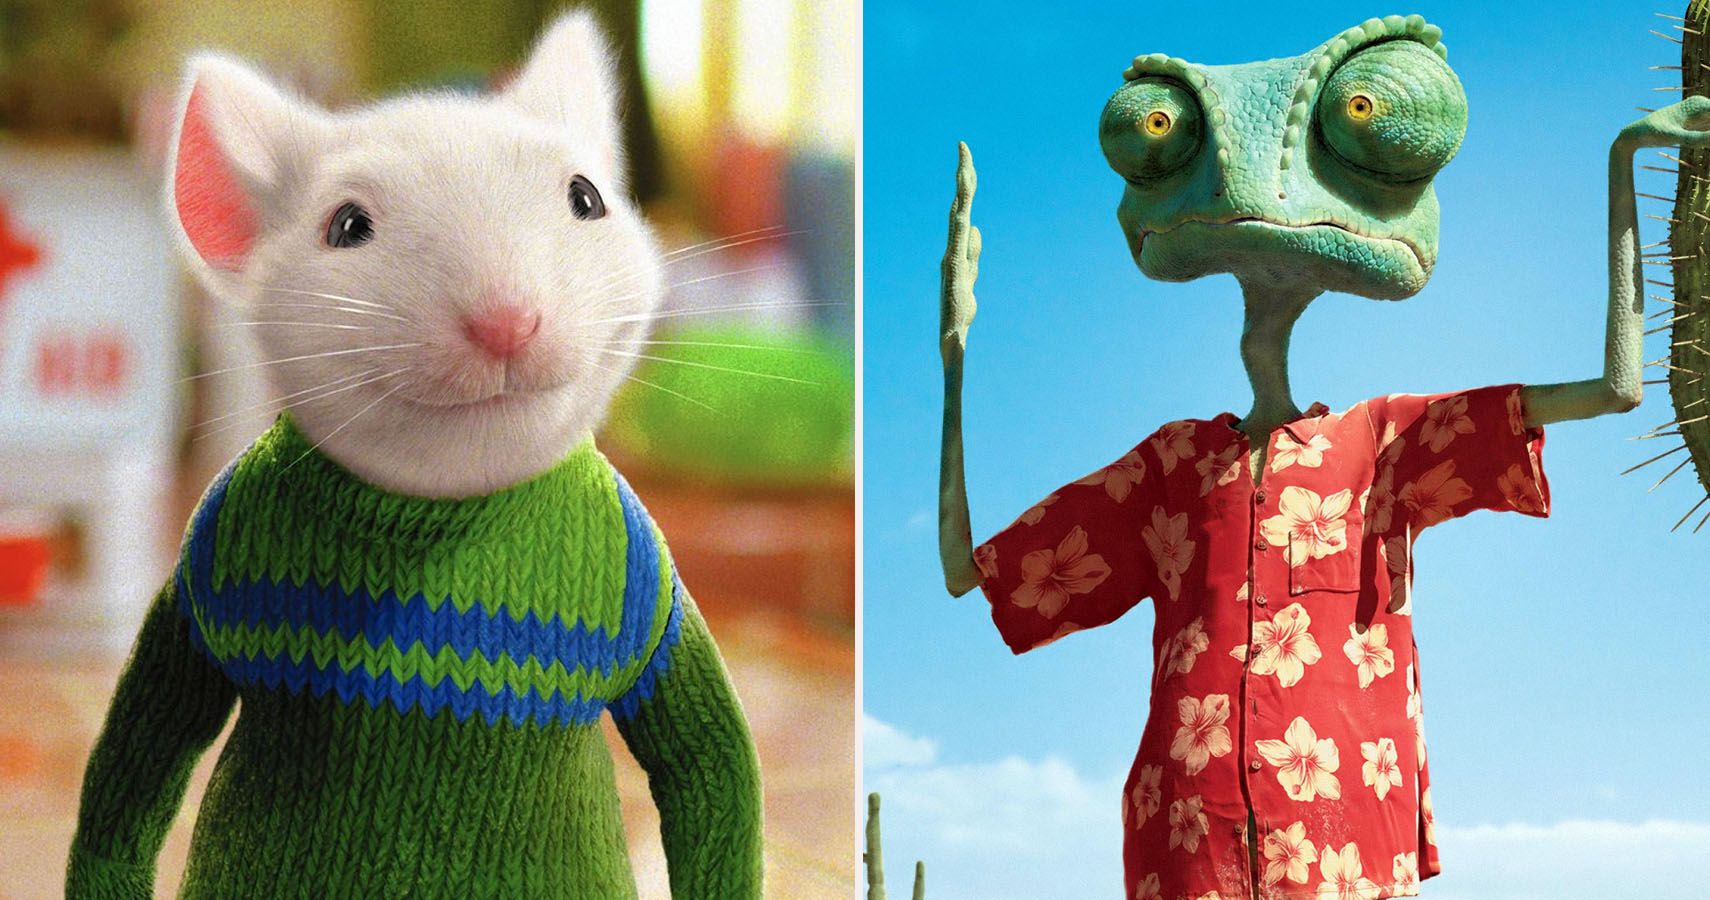 The 15 Best Movies For Kids On Amazon Prime (That You'll Also Enjoy)